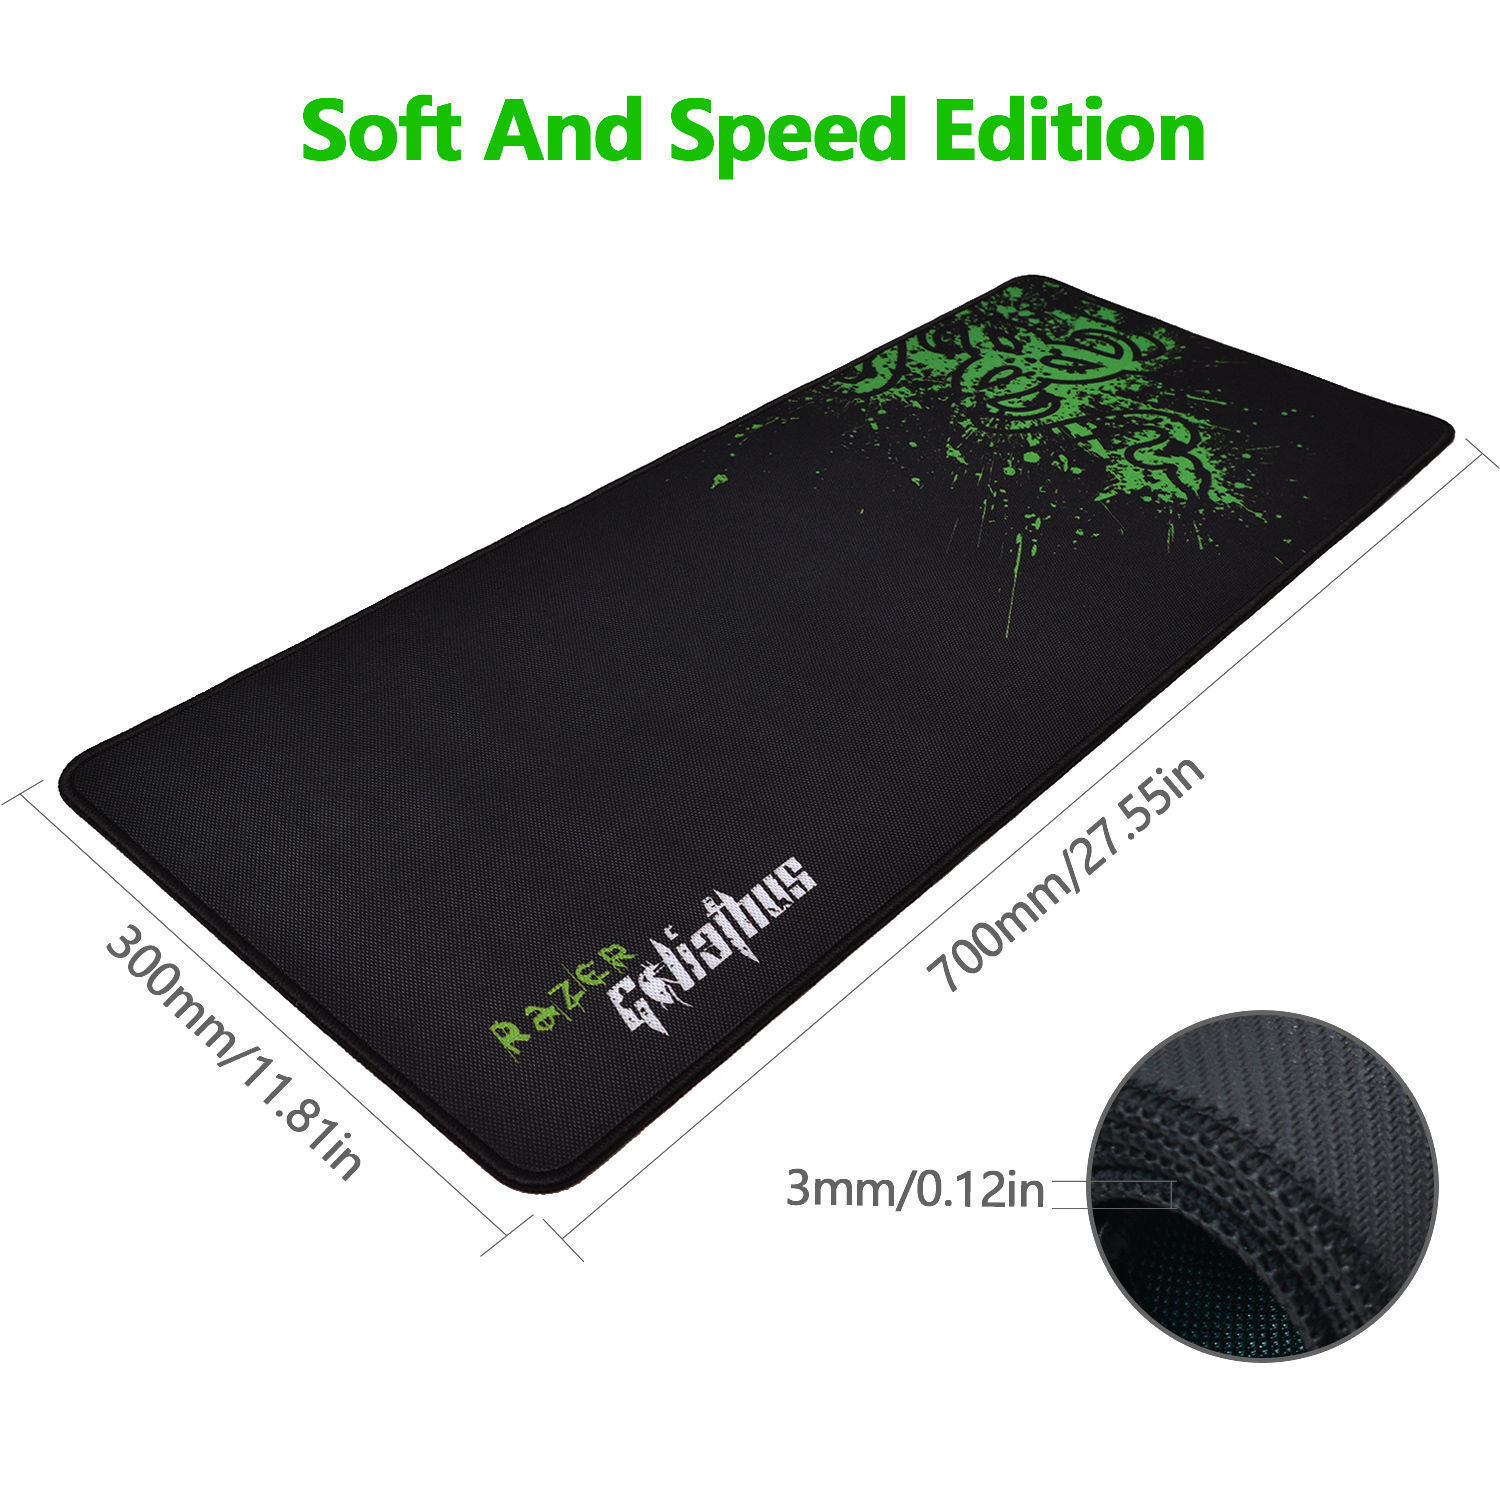 Large Razer Goliathus Gaming Mouse Pad Mat Speed Edition 700*300*3mm Black Green